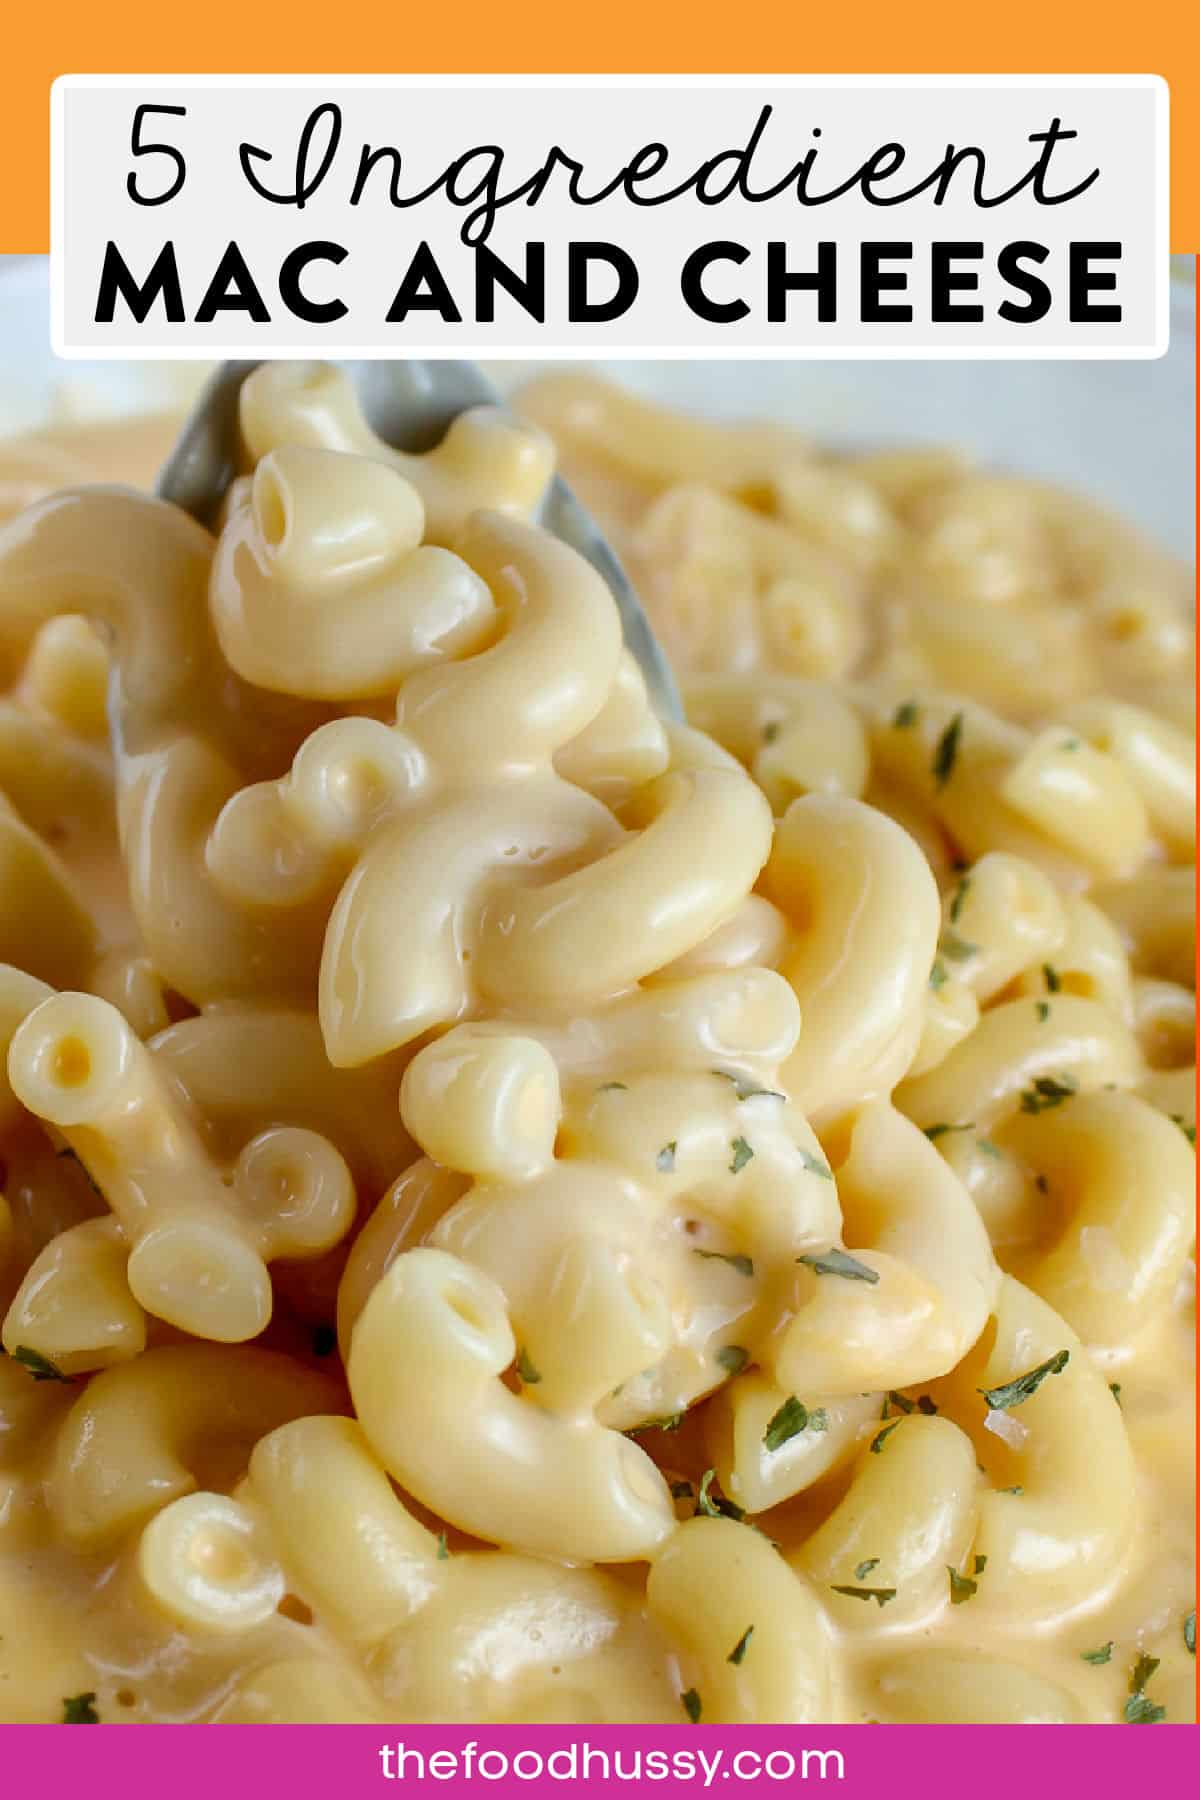 This 5 Ingredient Mac and Cheese is by far the creamiest macaroni and cheese you will ever try! It's really easy and one pot - I love it! Plus with only 5 ingredients - it will be on the table in just 20 minutes! via @foodhussy